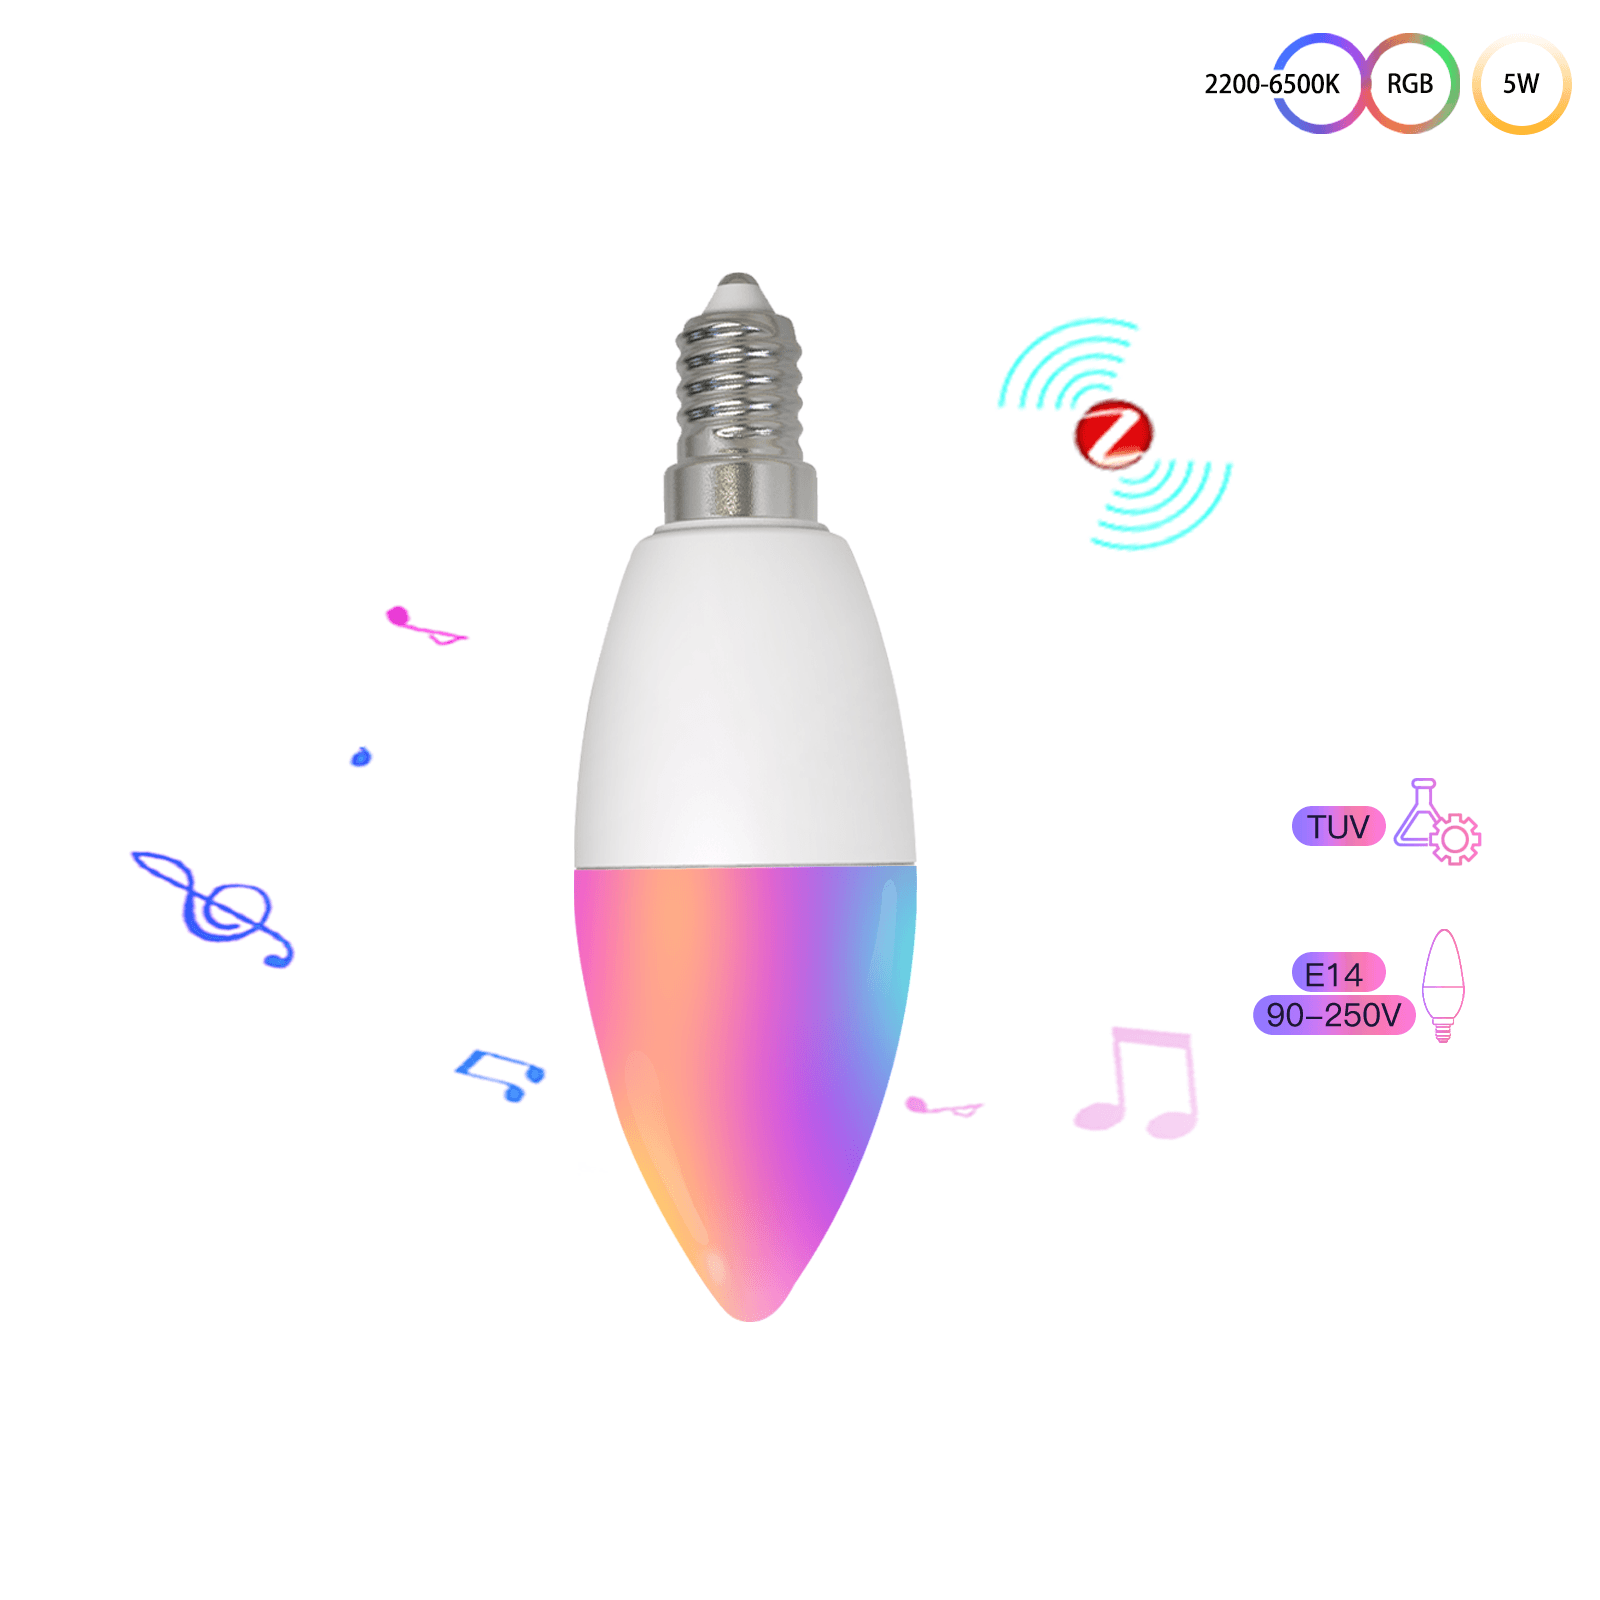 MOES WiFi Smart Candle LED Light|Best Colored Dimmable Smart Bulbs